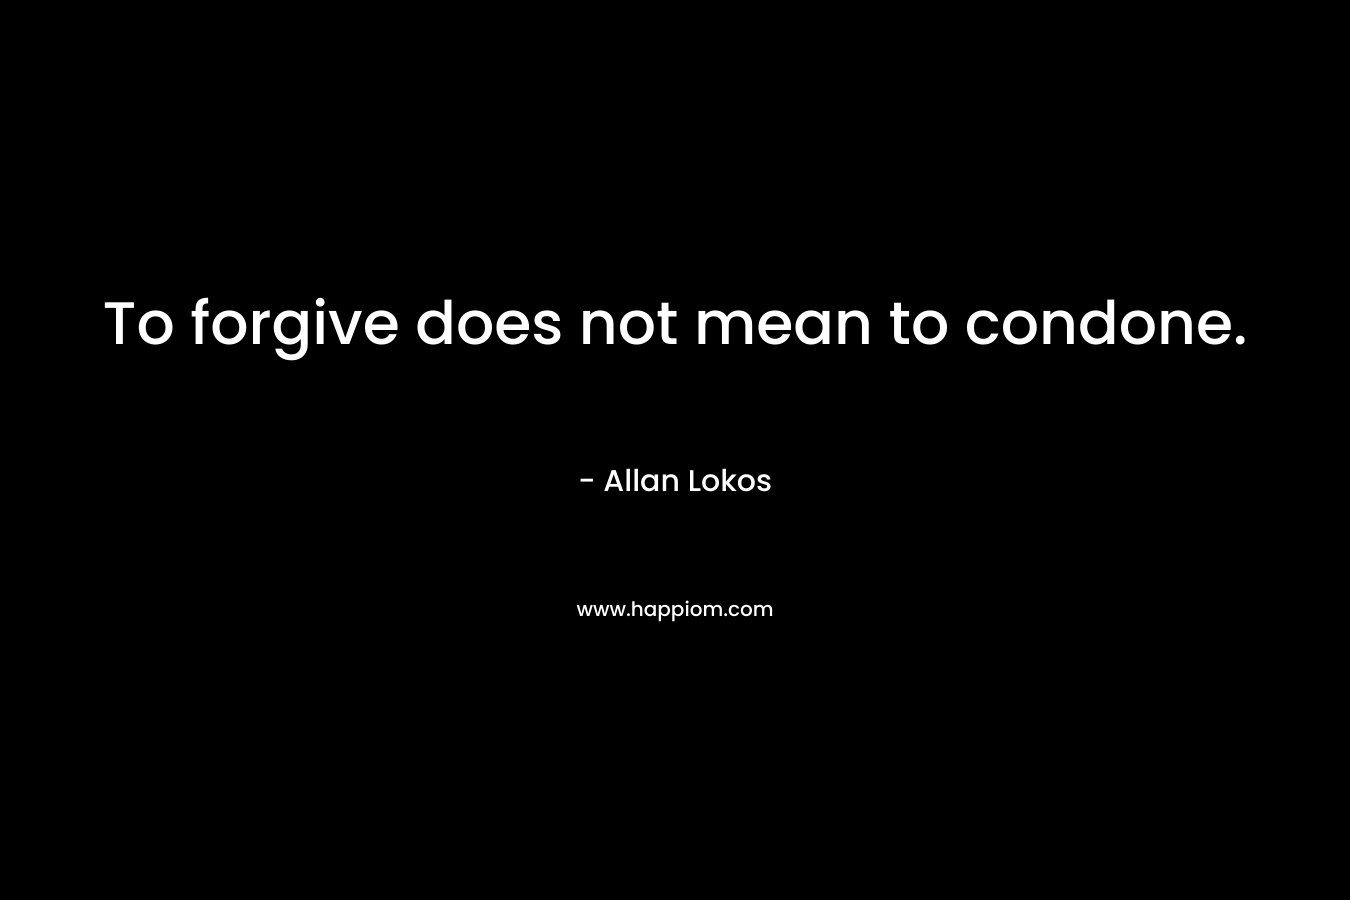 To forgive does not mean to condone.